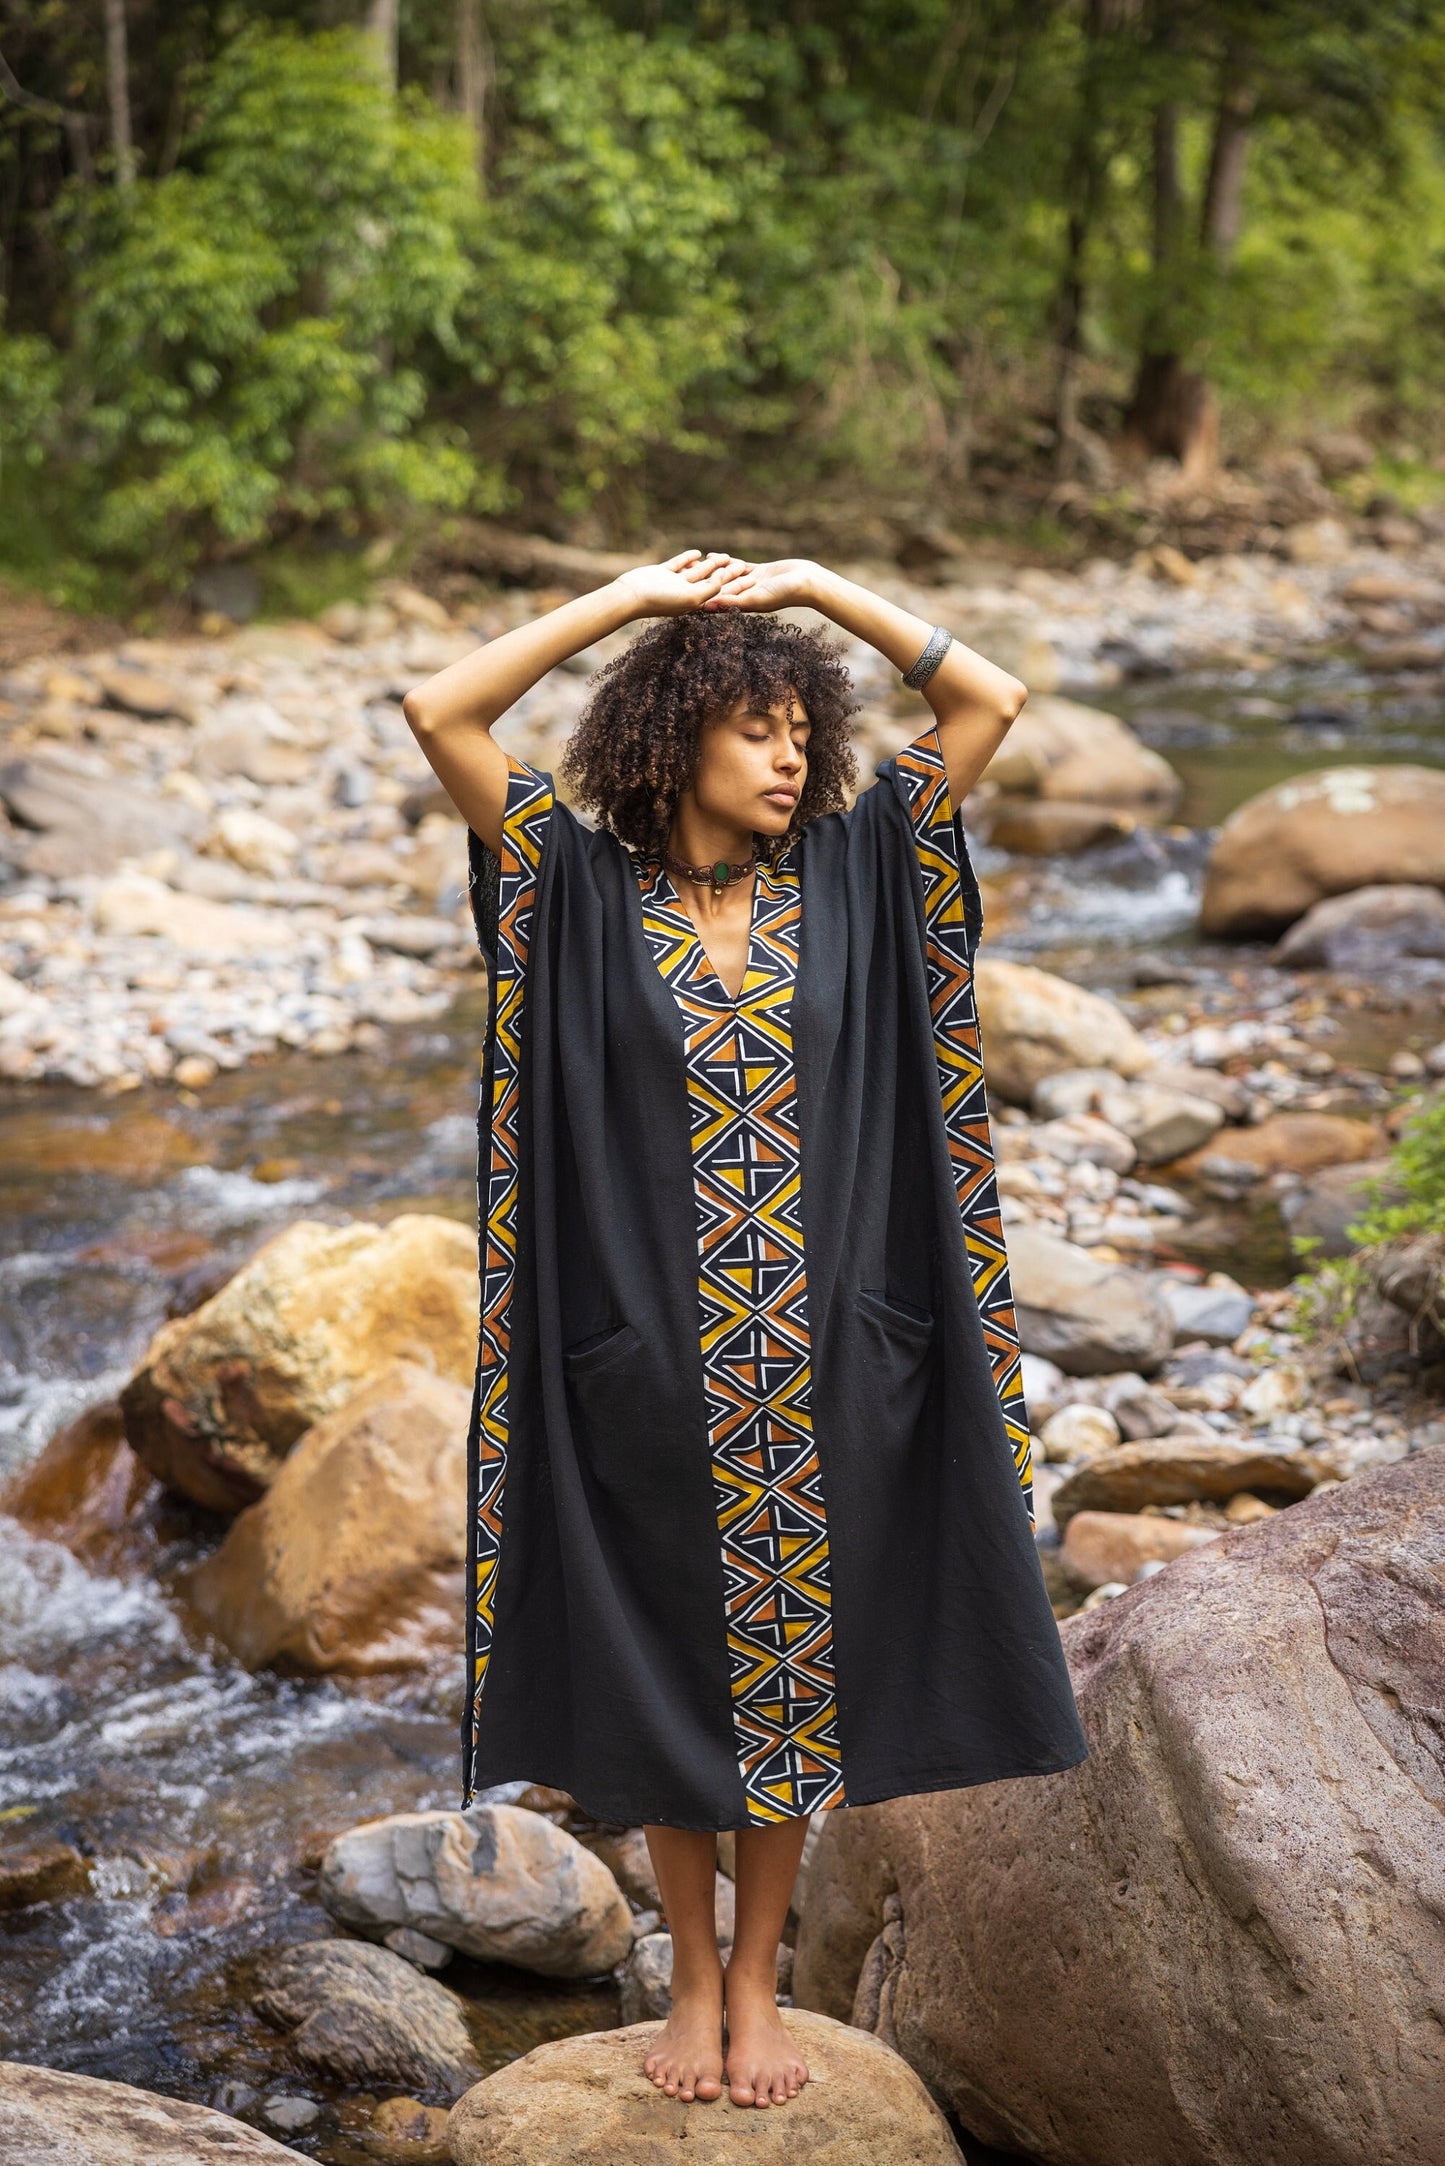 Introducing our KAFATU stunning handmade African patterned Kaftan, the perfect choice for any ceremonial or ritual occasion. This beautiful piece features vibrant, bold colours and intricate African-inspired tribal patterns naturally dyed